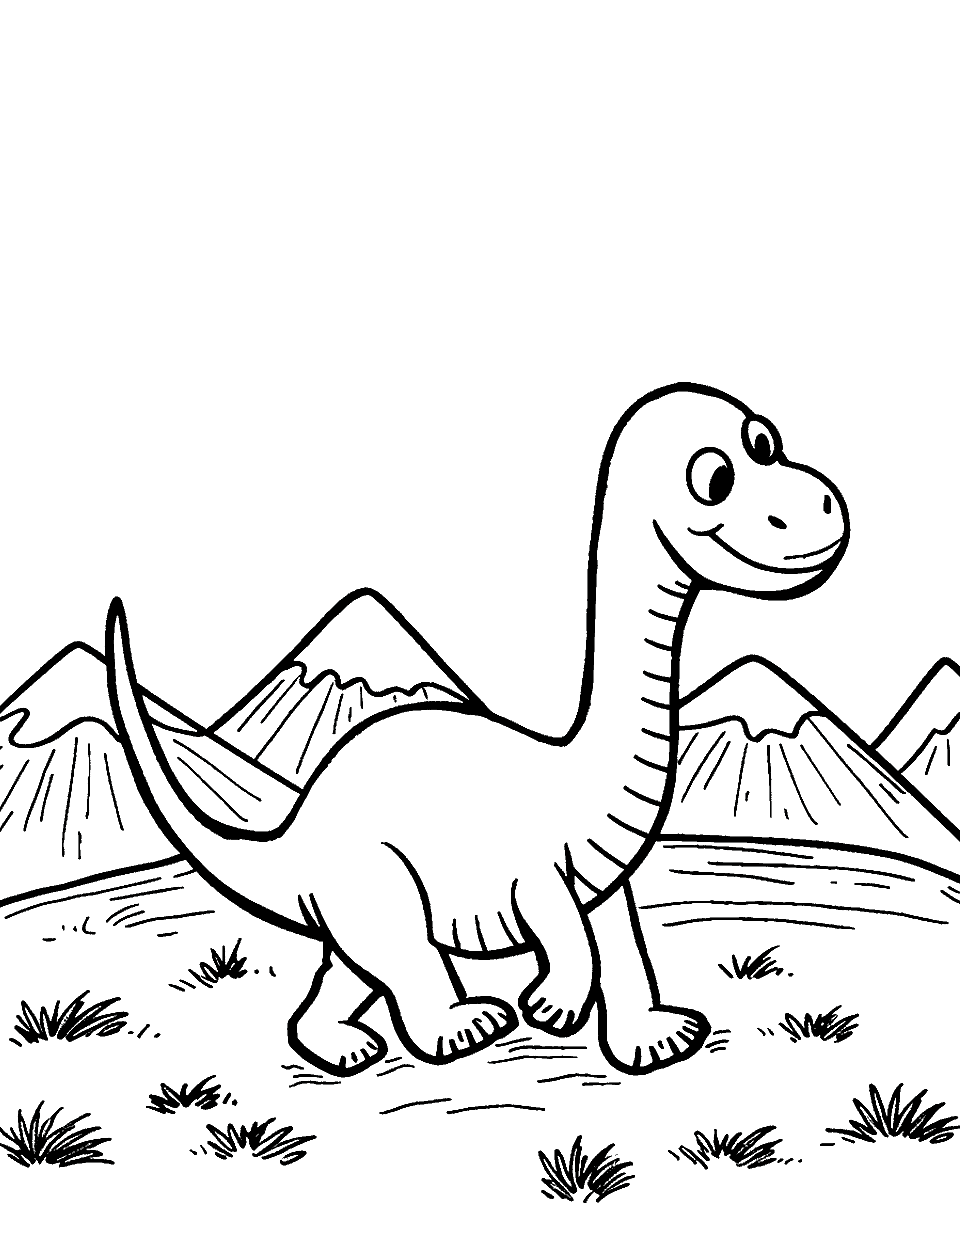 Dinosaur Roaming the Land Toddler Coloring Page - A friendly dinosaur walking through a plain with mountains in the background.